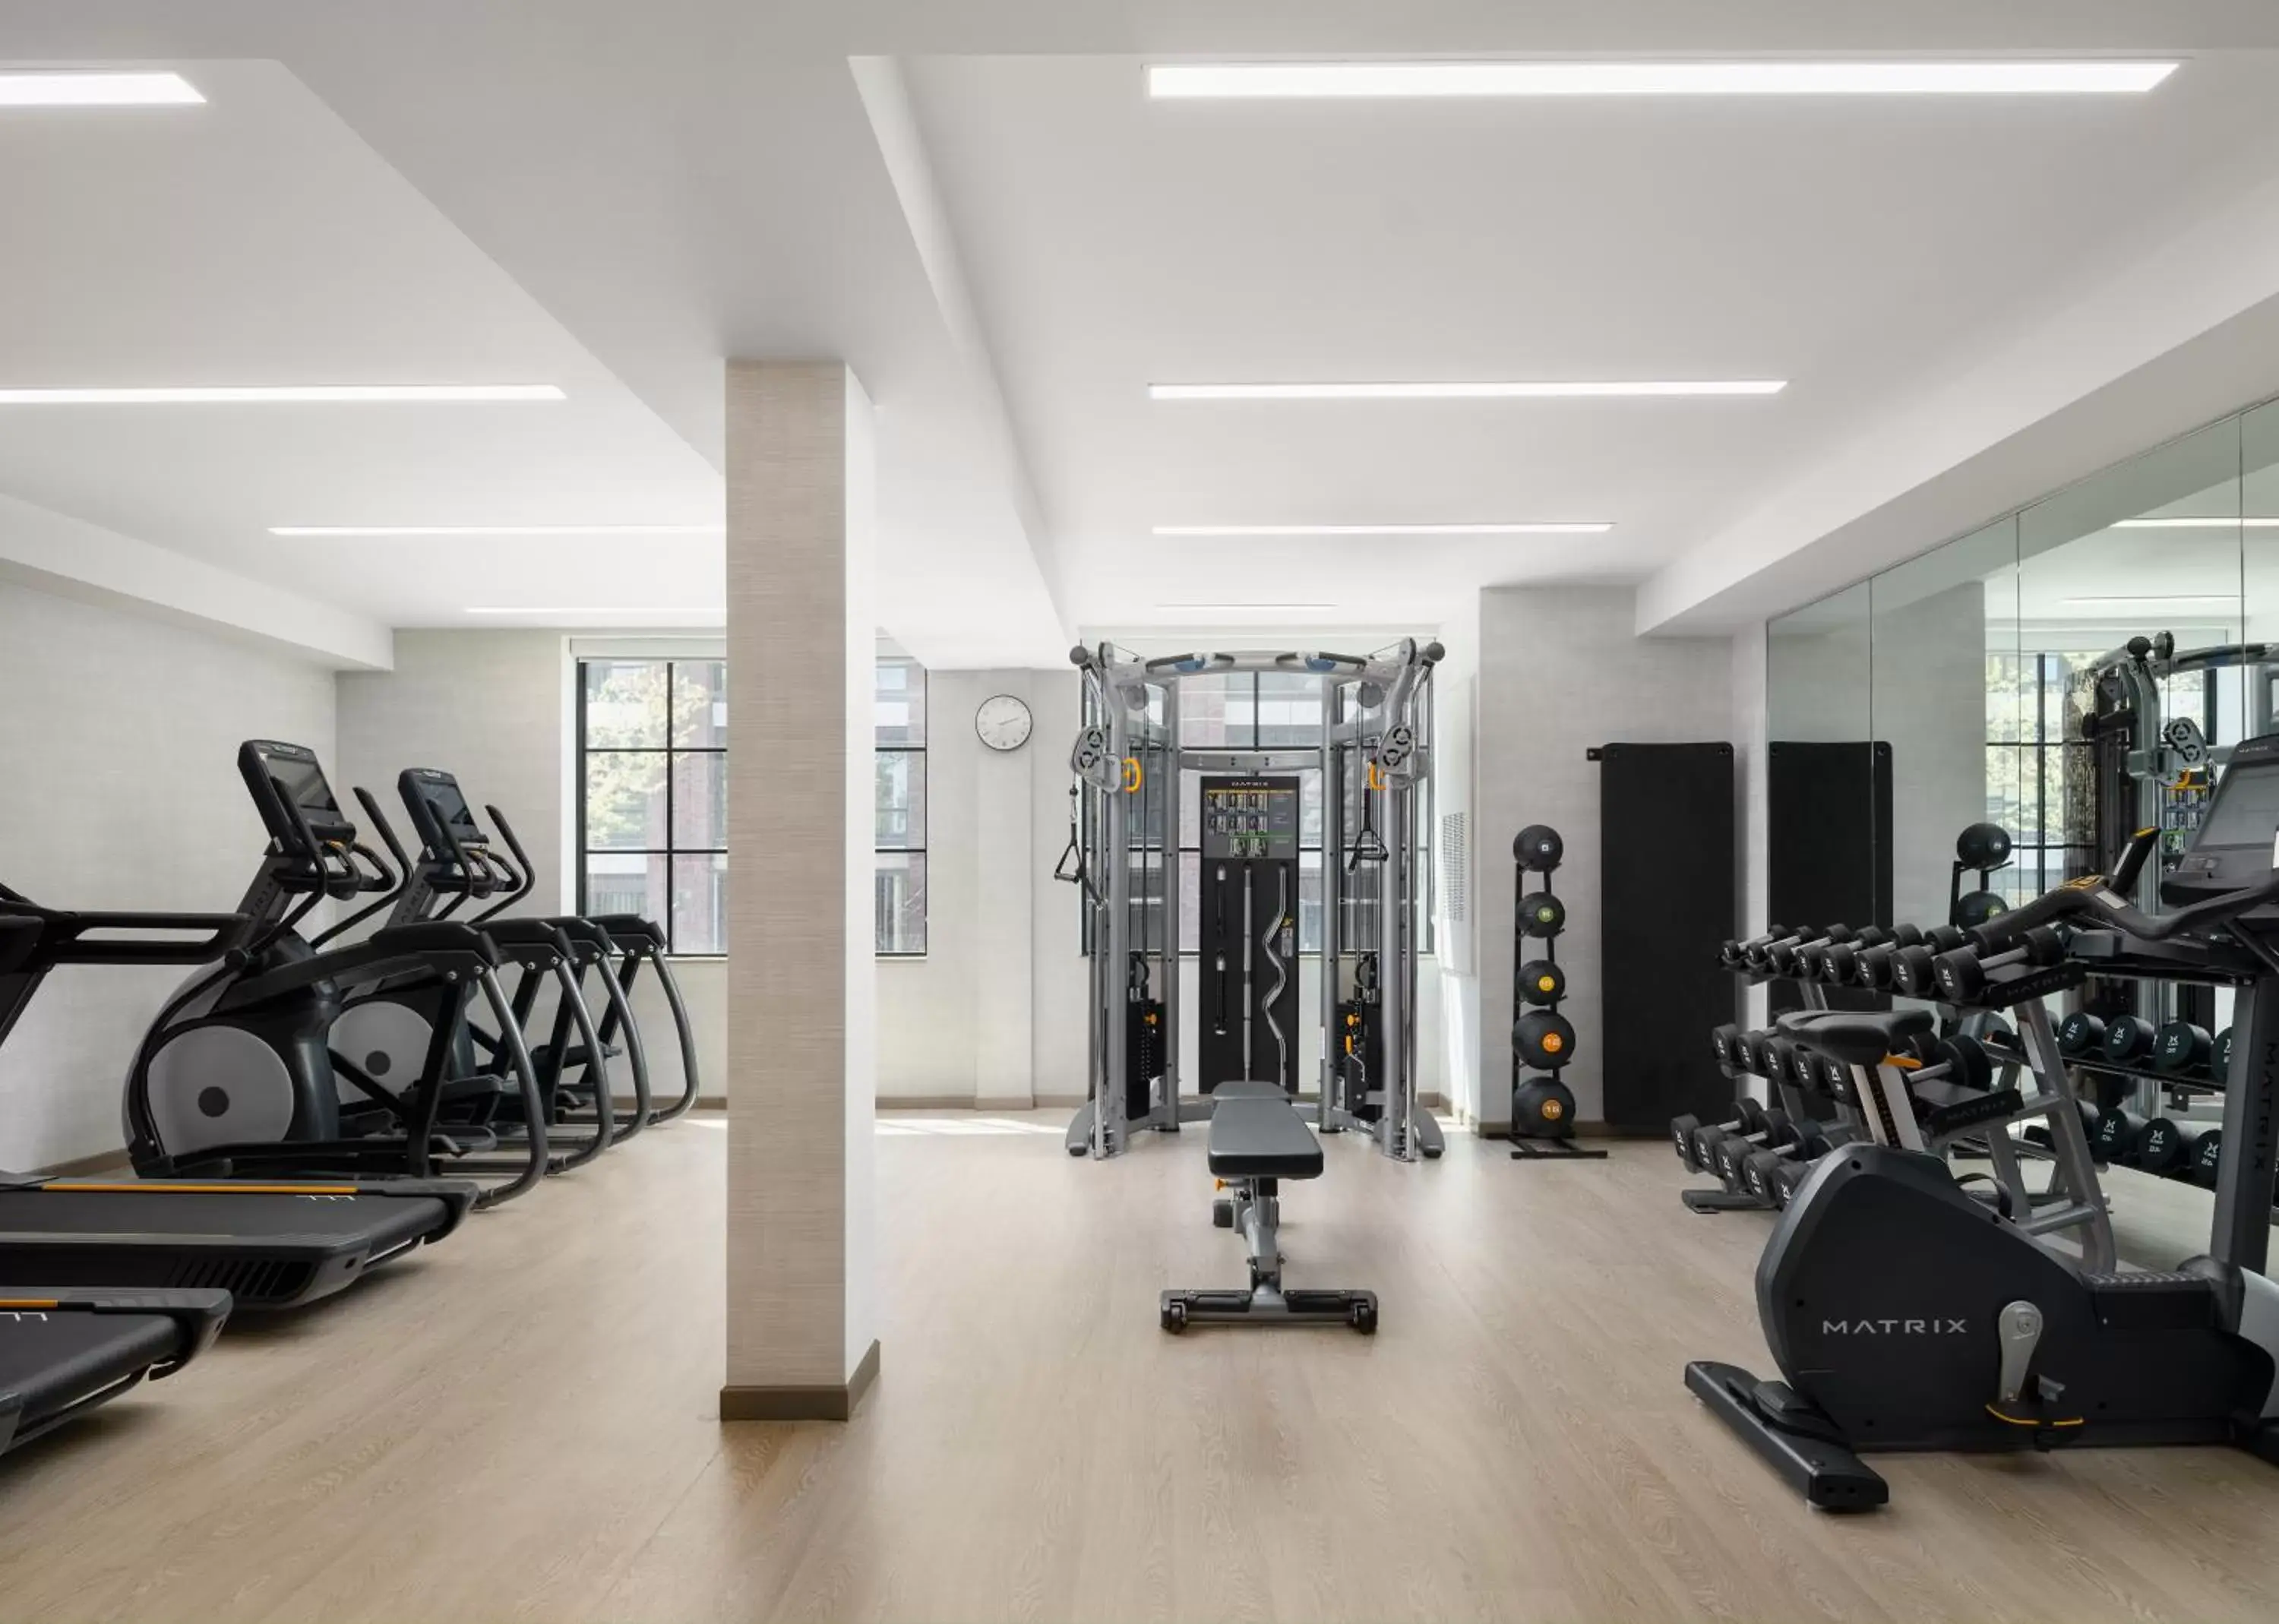 Fitness centre/facilities, Fitness Center/Facilities in AC Hotel by Marriott Dayton